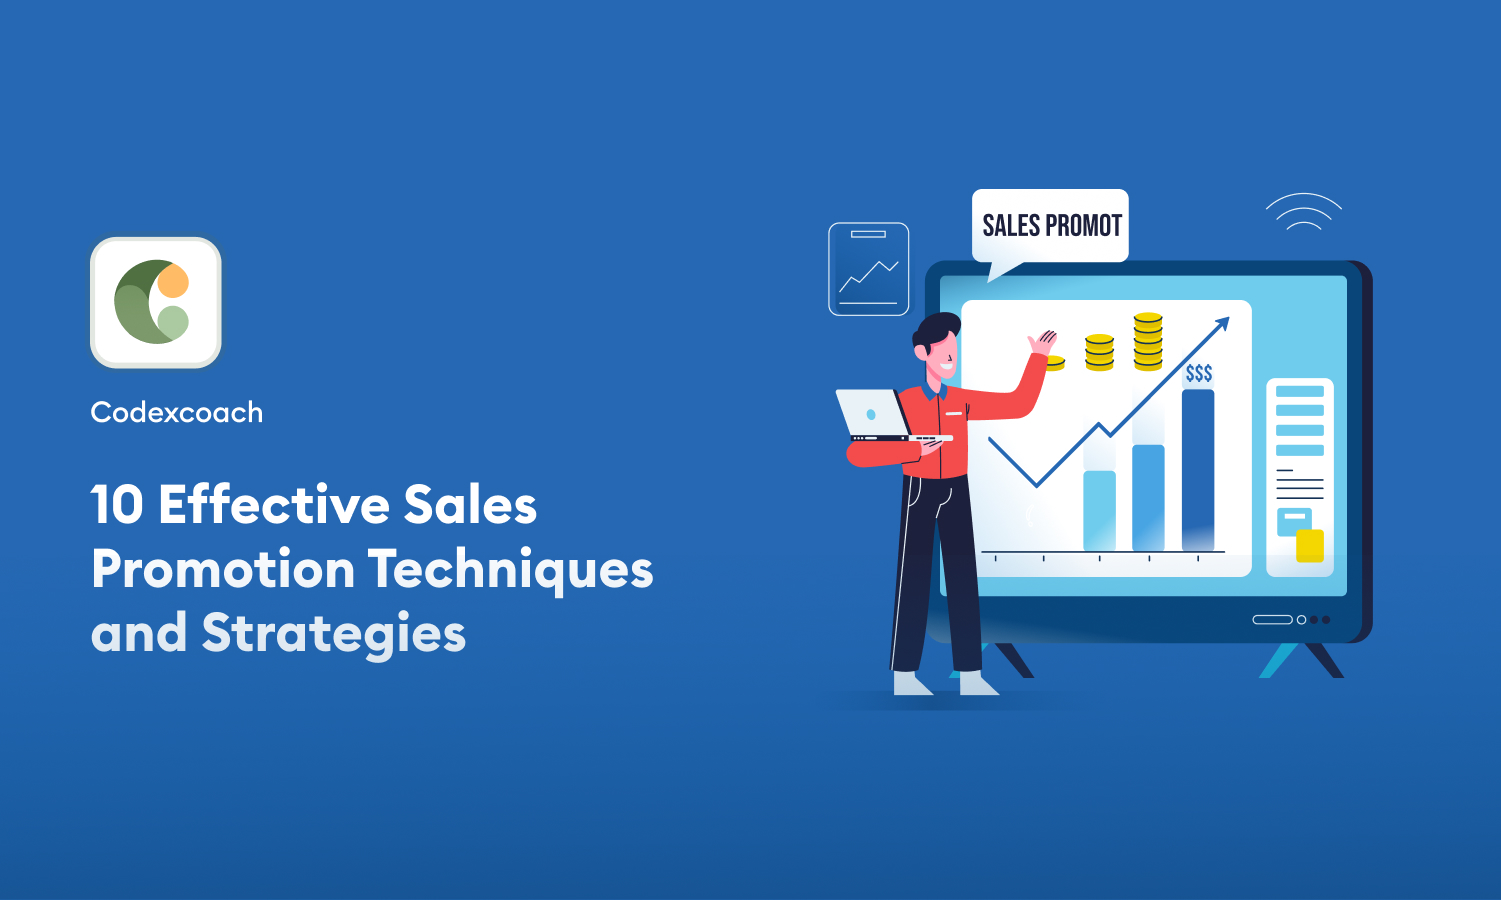 10 Effective Sales Promotion Techniques and Strategies